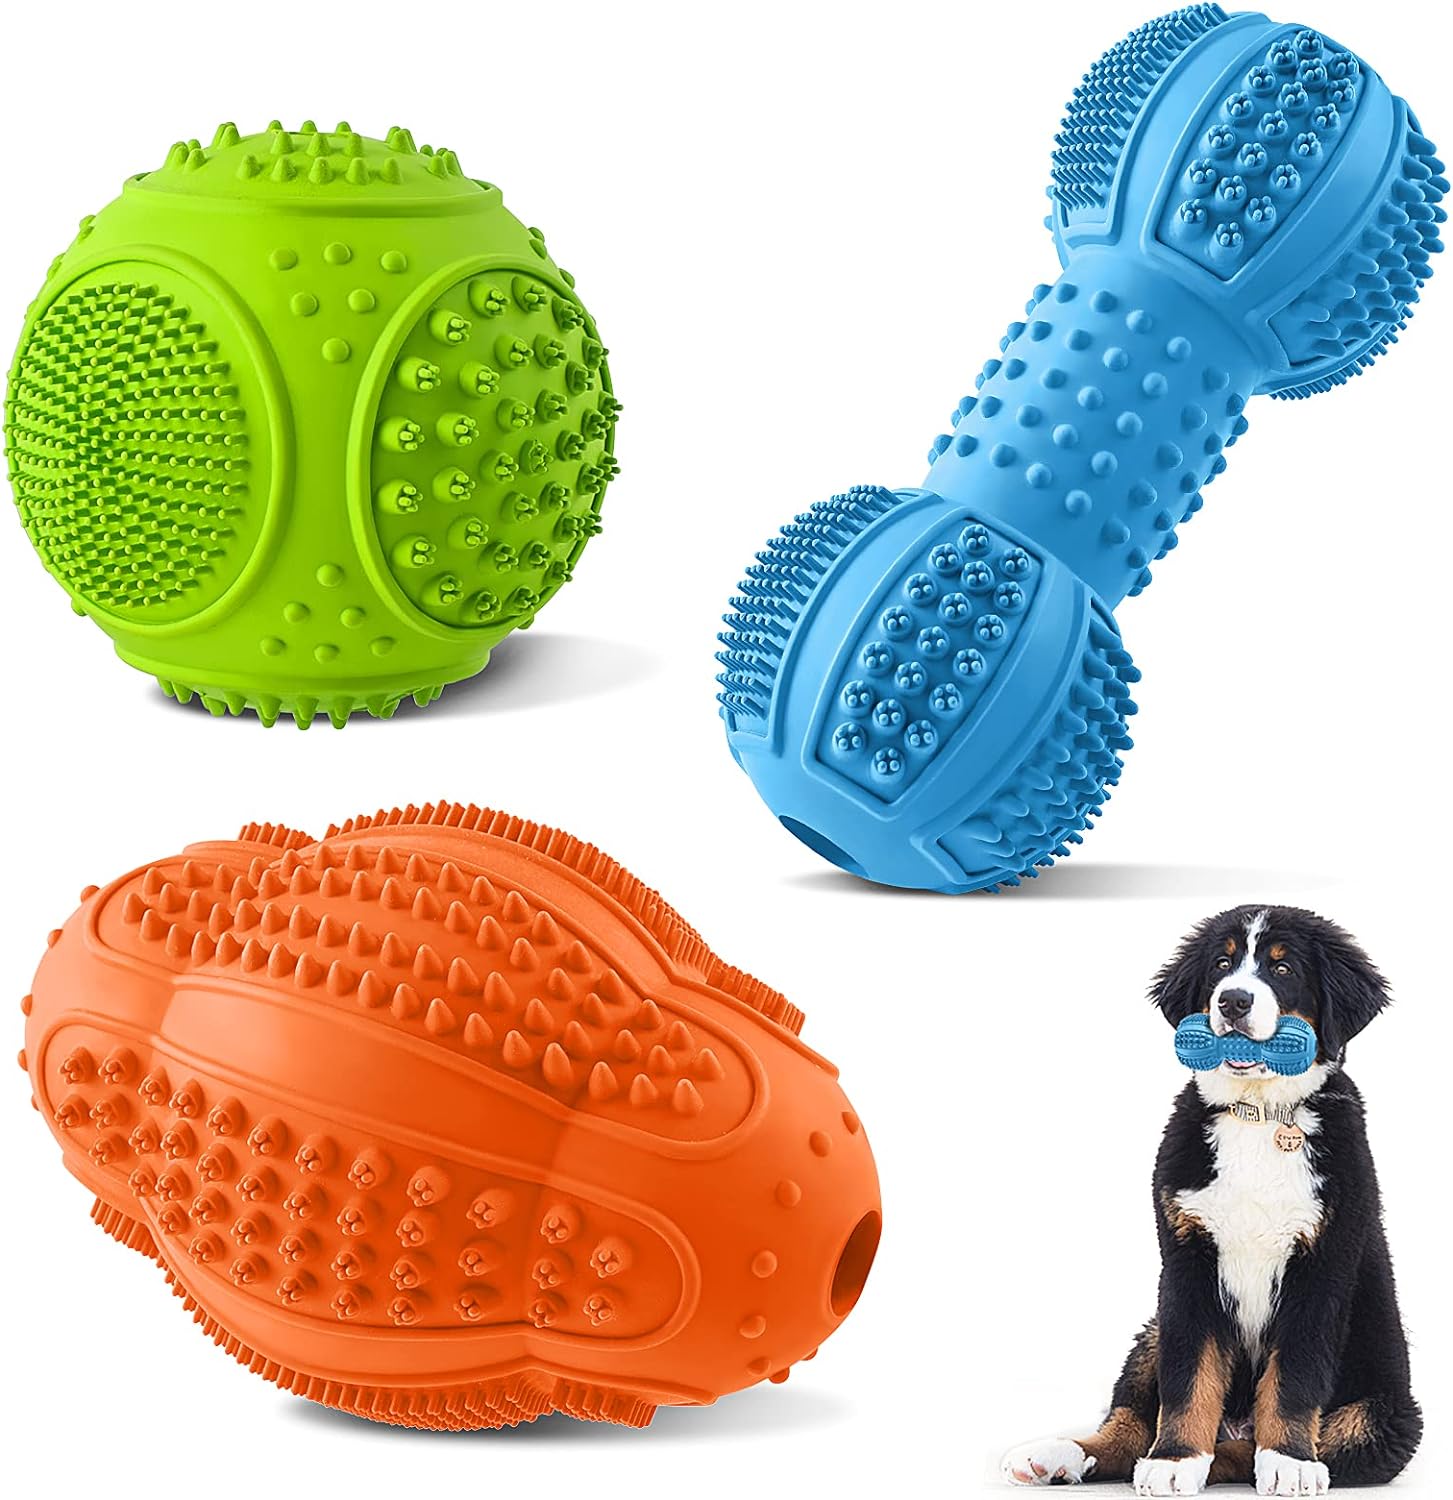 LUKITO Dog Chew Toys 3 Pack for Aggressive Chewers, Multifunctional Teeth Cleaning and Gum Massage, Tough Toys with Natural Rubber for Large and Medium Dog